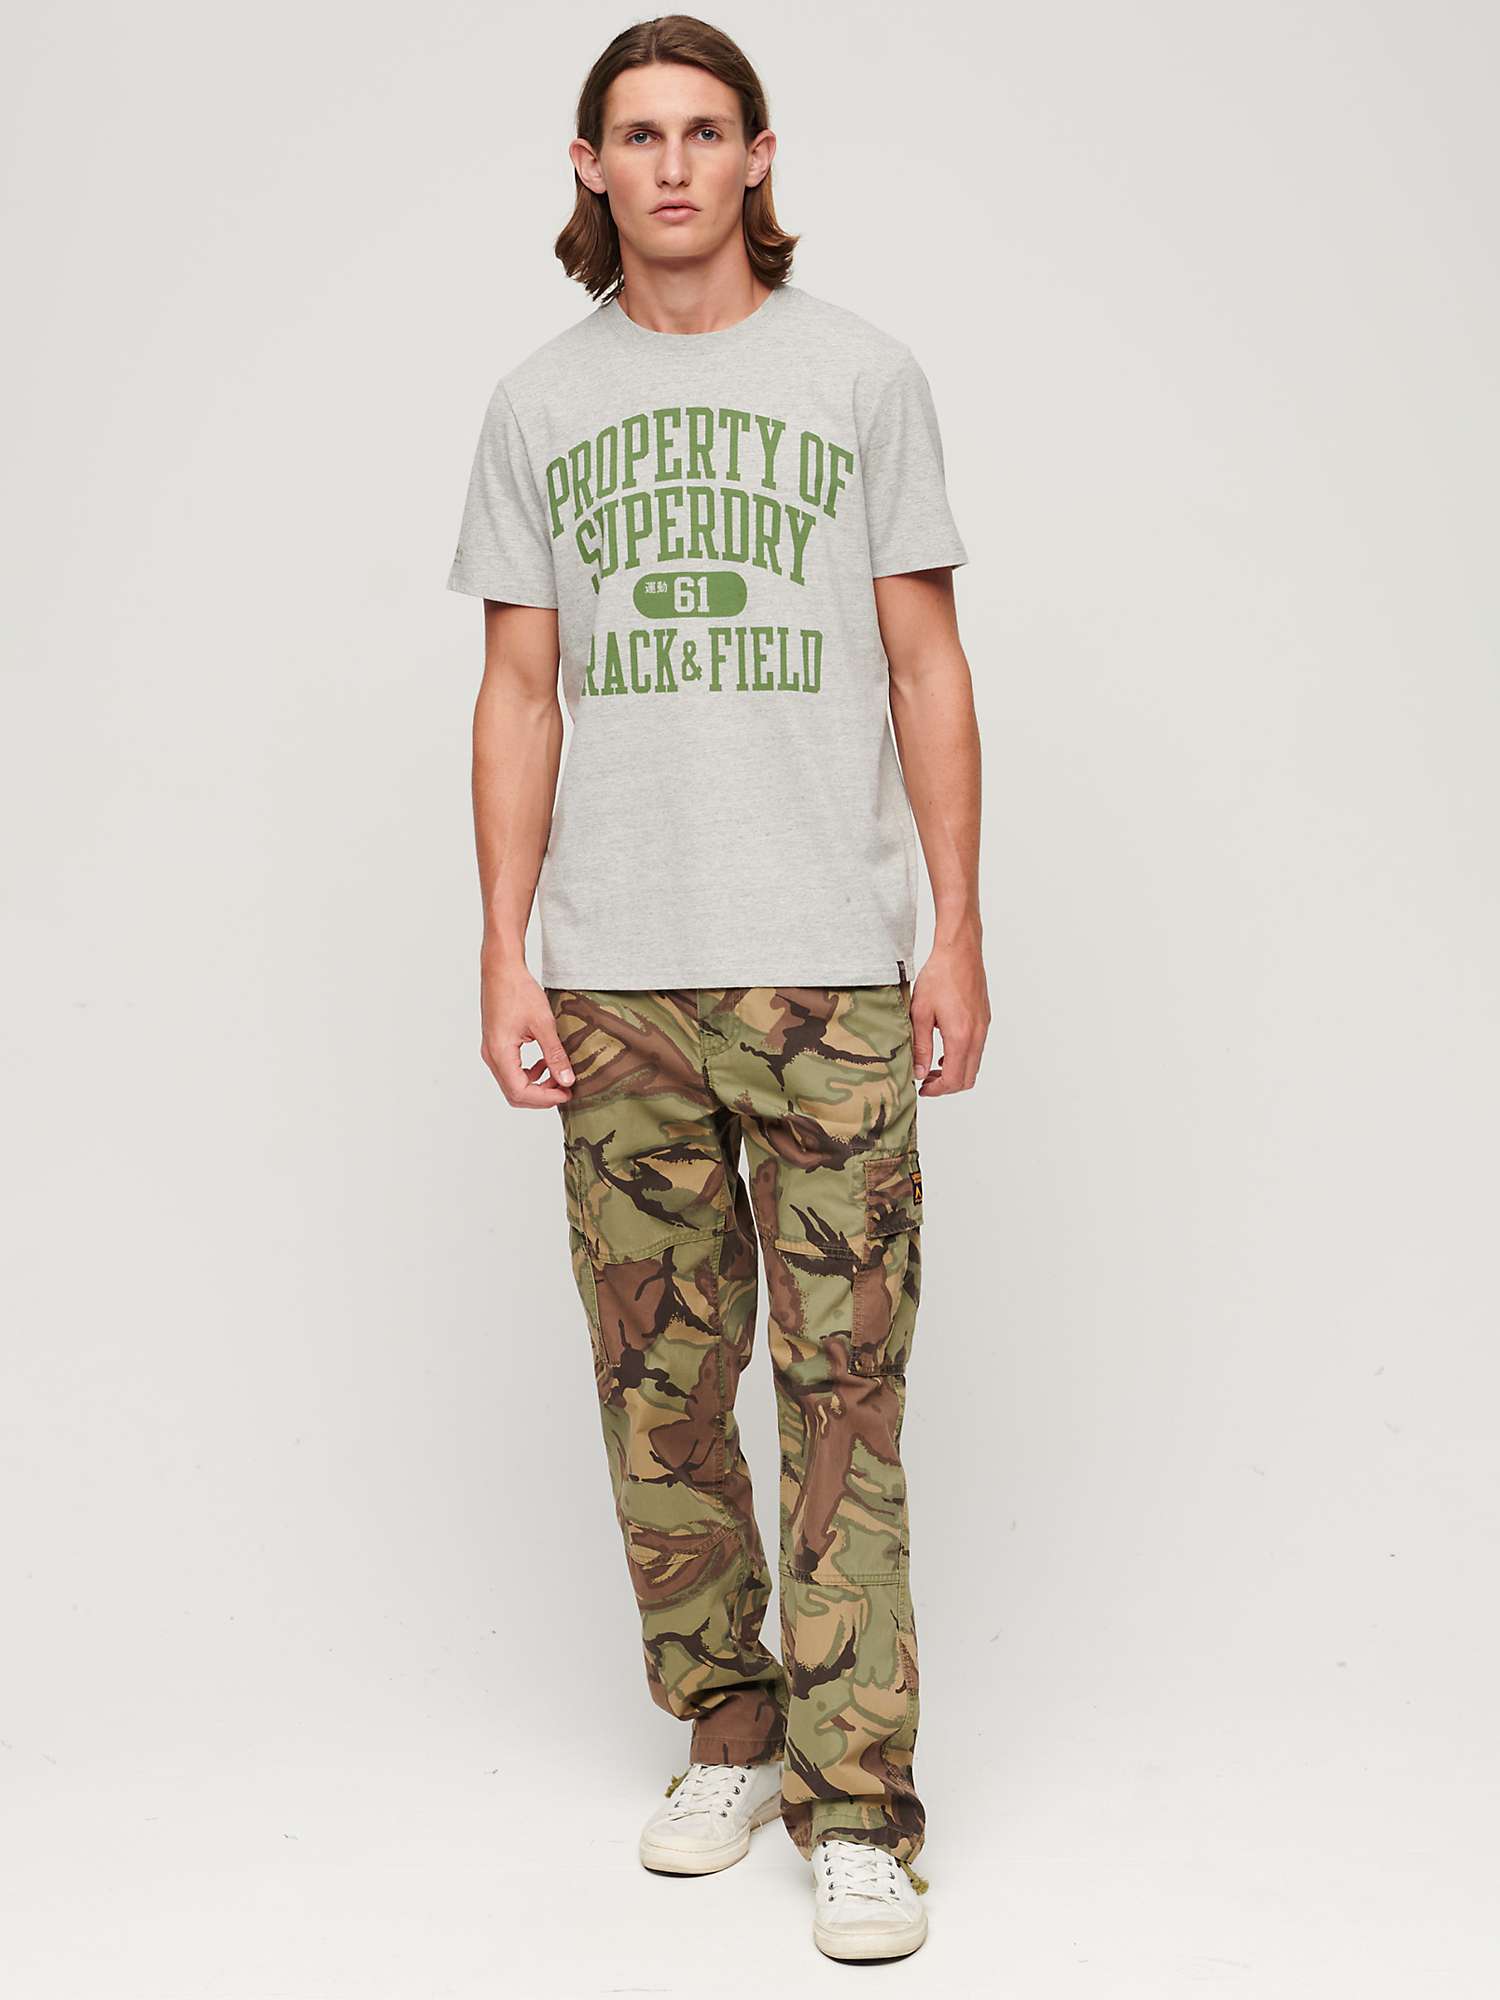 Buy Superdry Athletic College Graphic T-Shirt Online at johnlewis.com